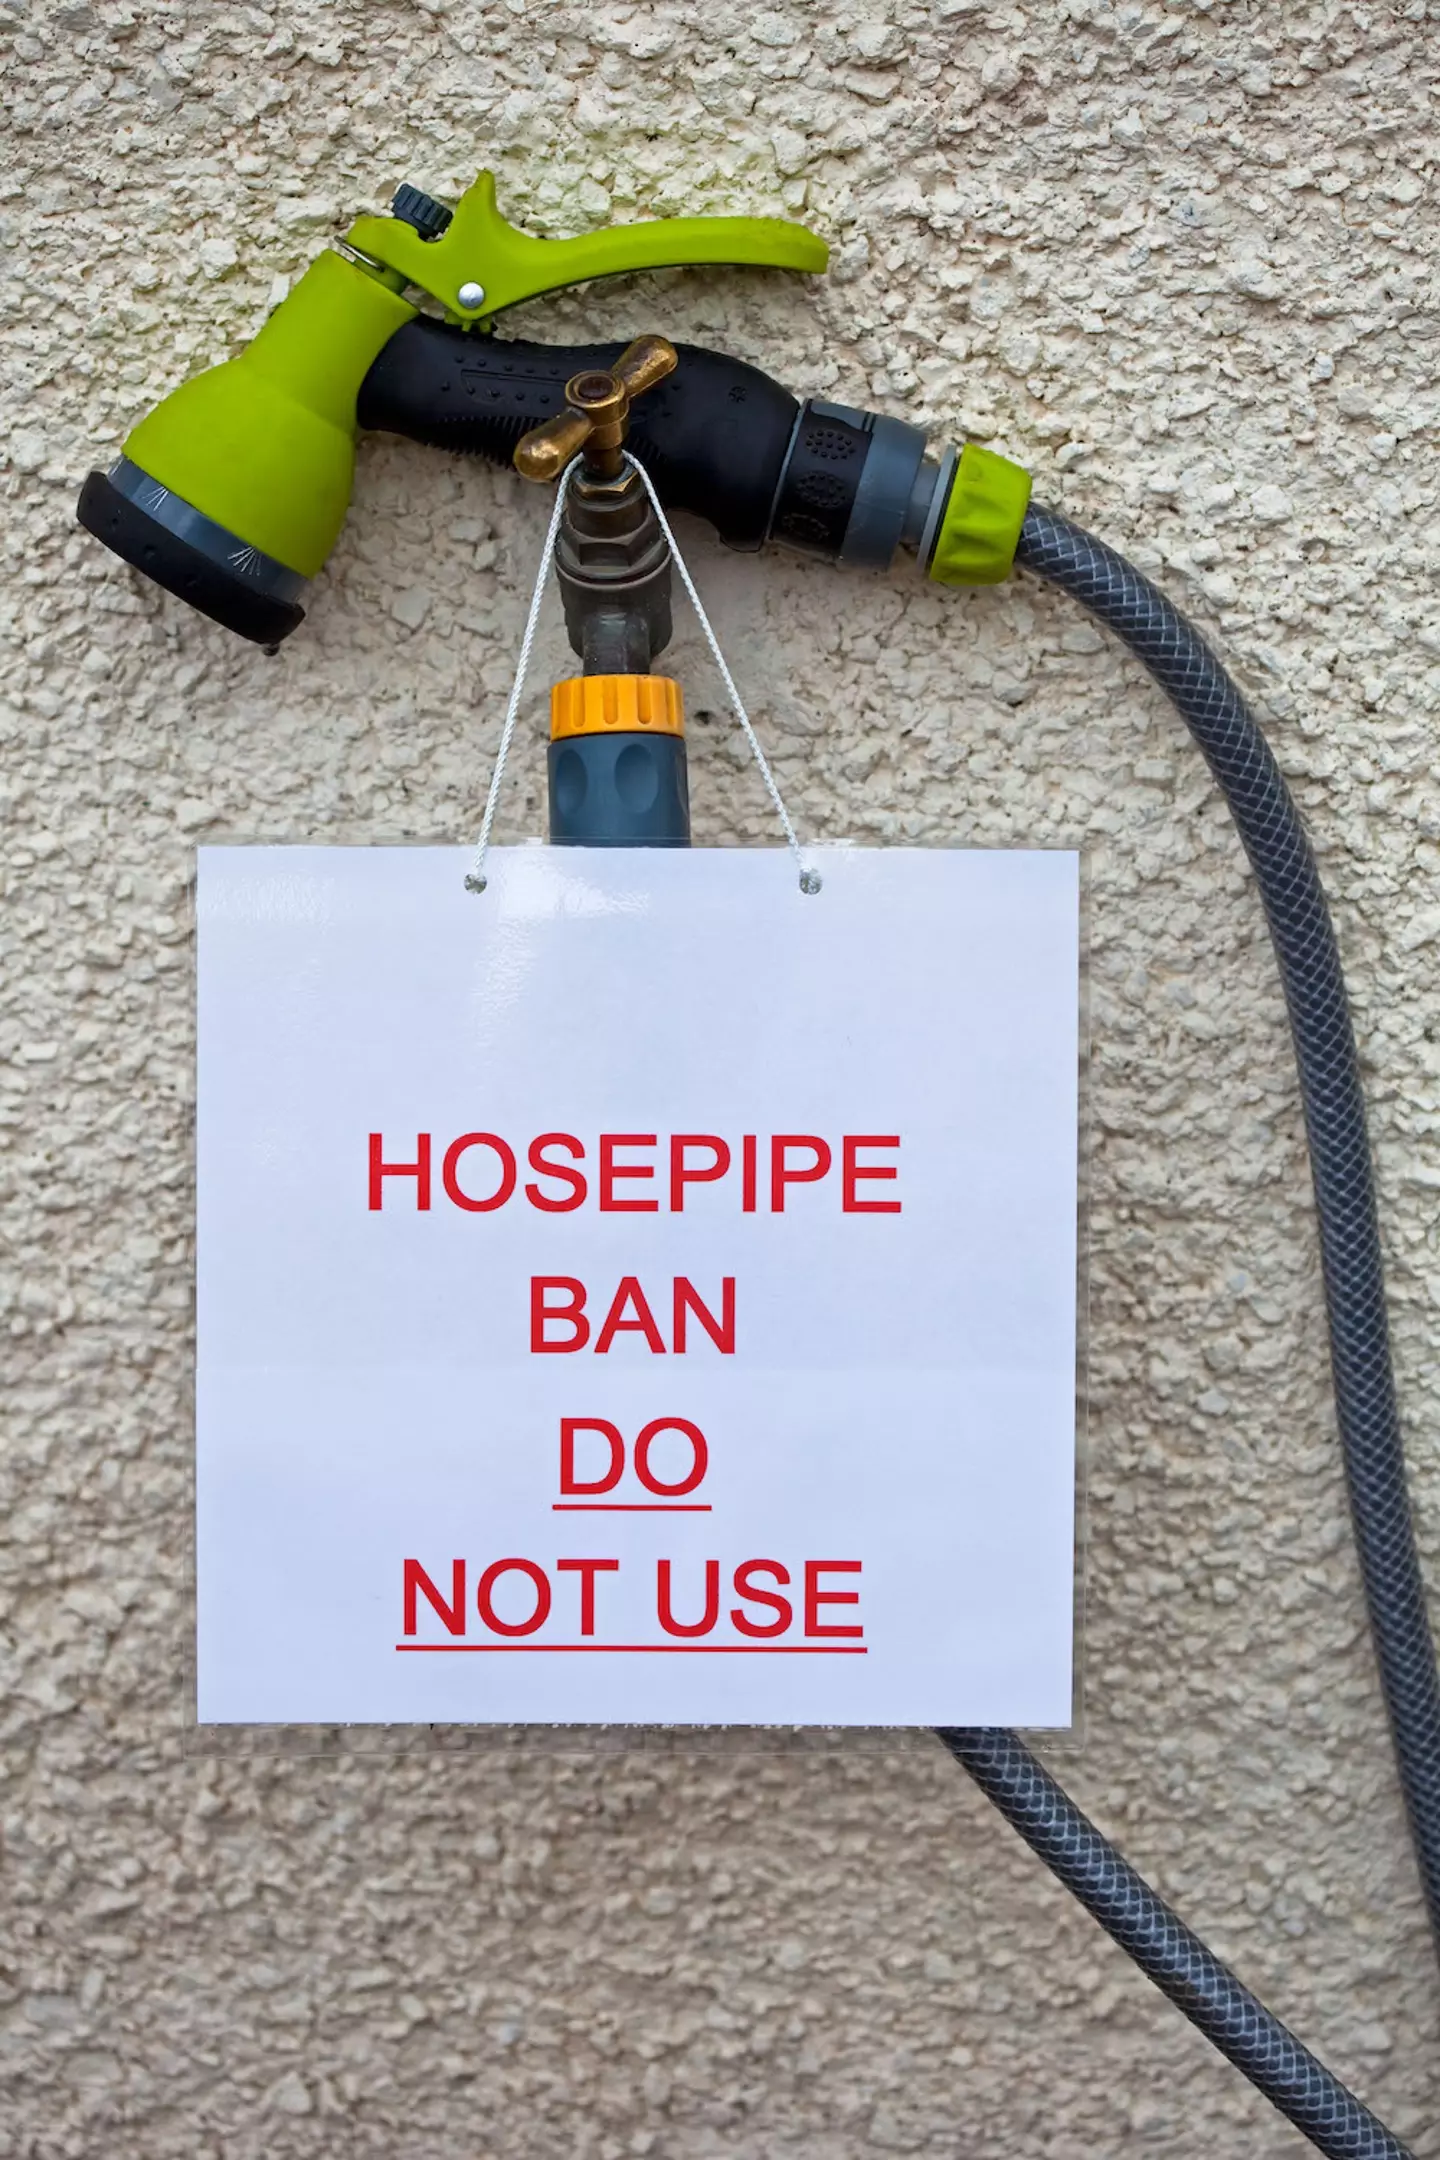 A hosepipe ban has already been implemented in some parts of England.